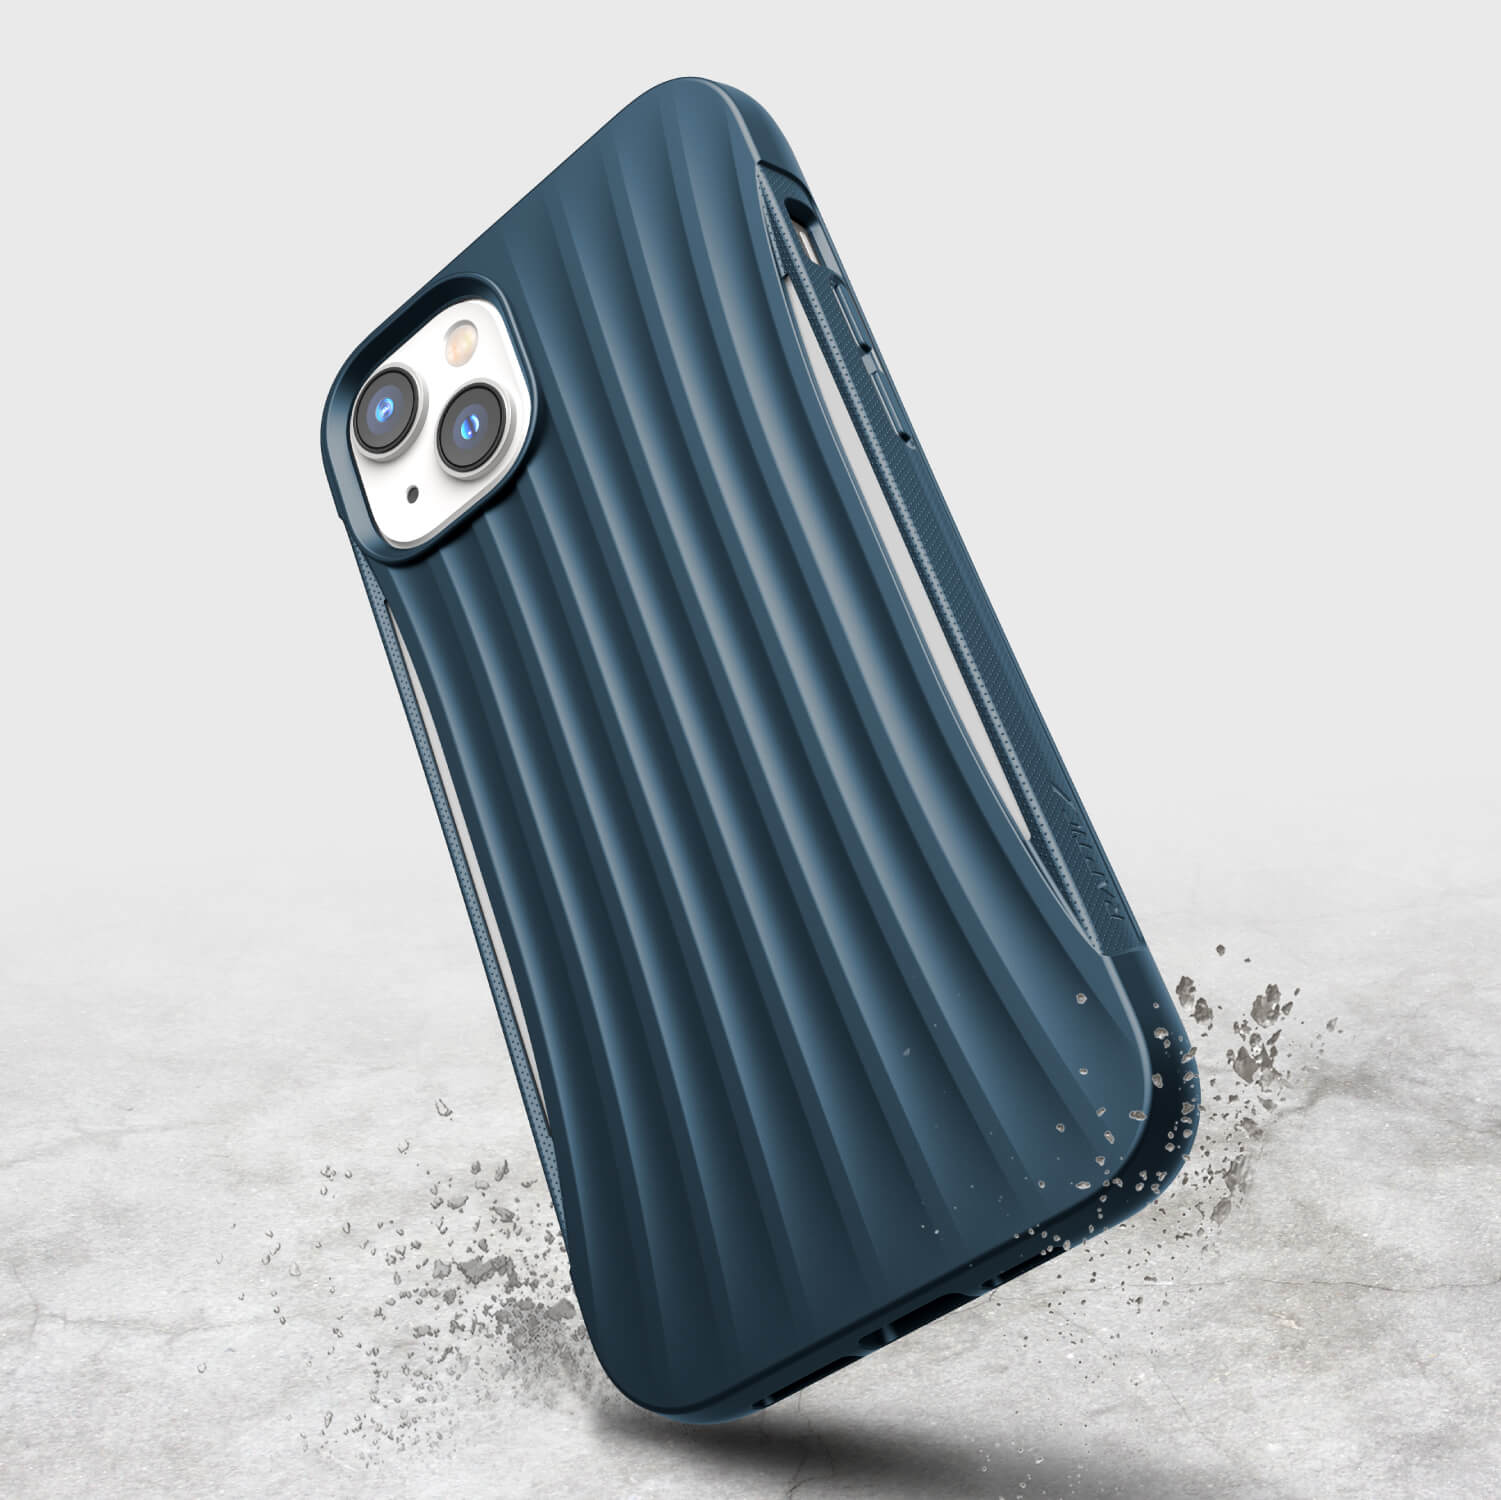 The pocket-friendly design of the biodegradable blue iPhone 14 Plus Clutch case by Raptic provides military-grade drop protection.